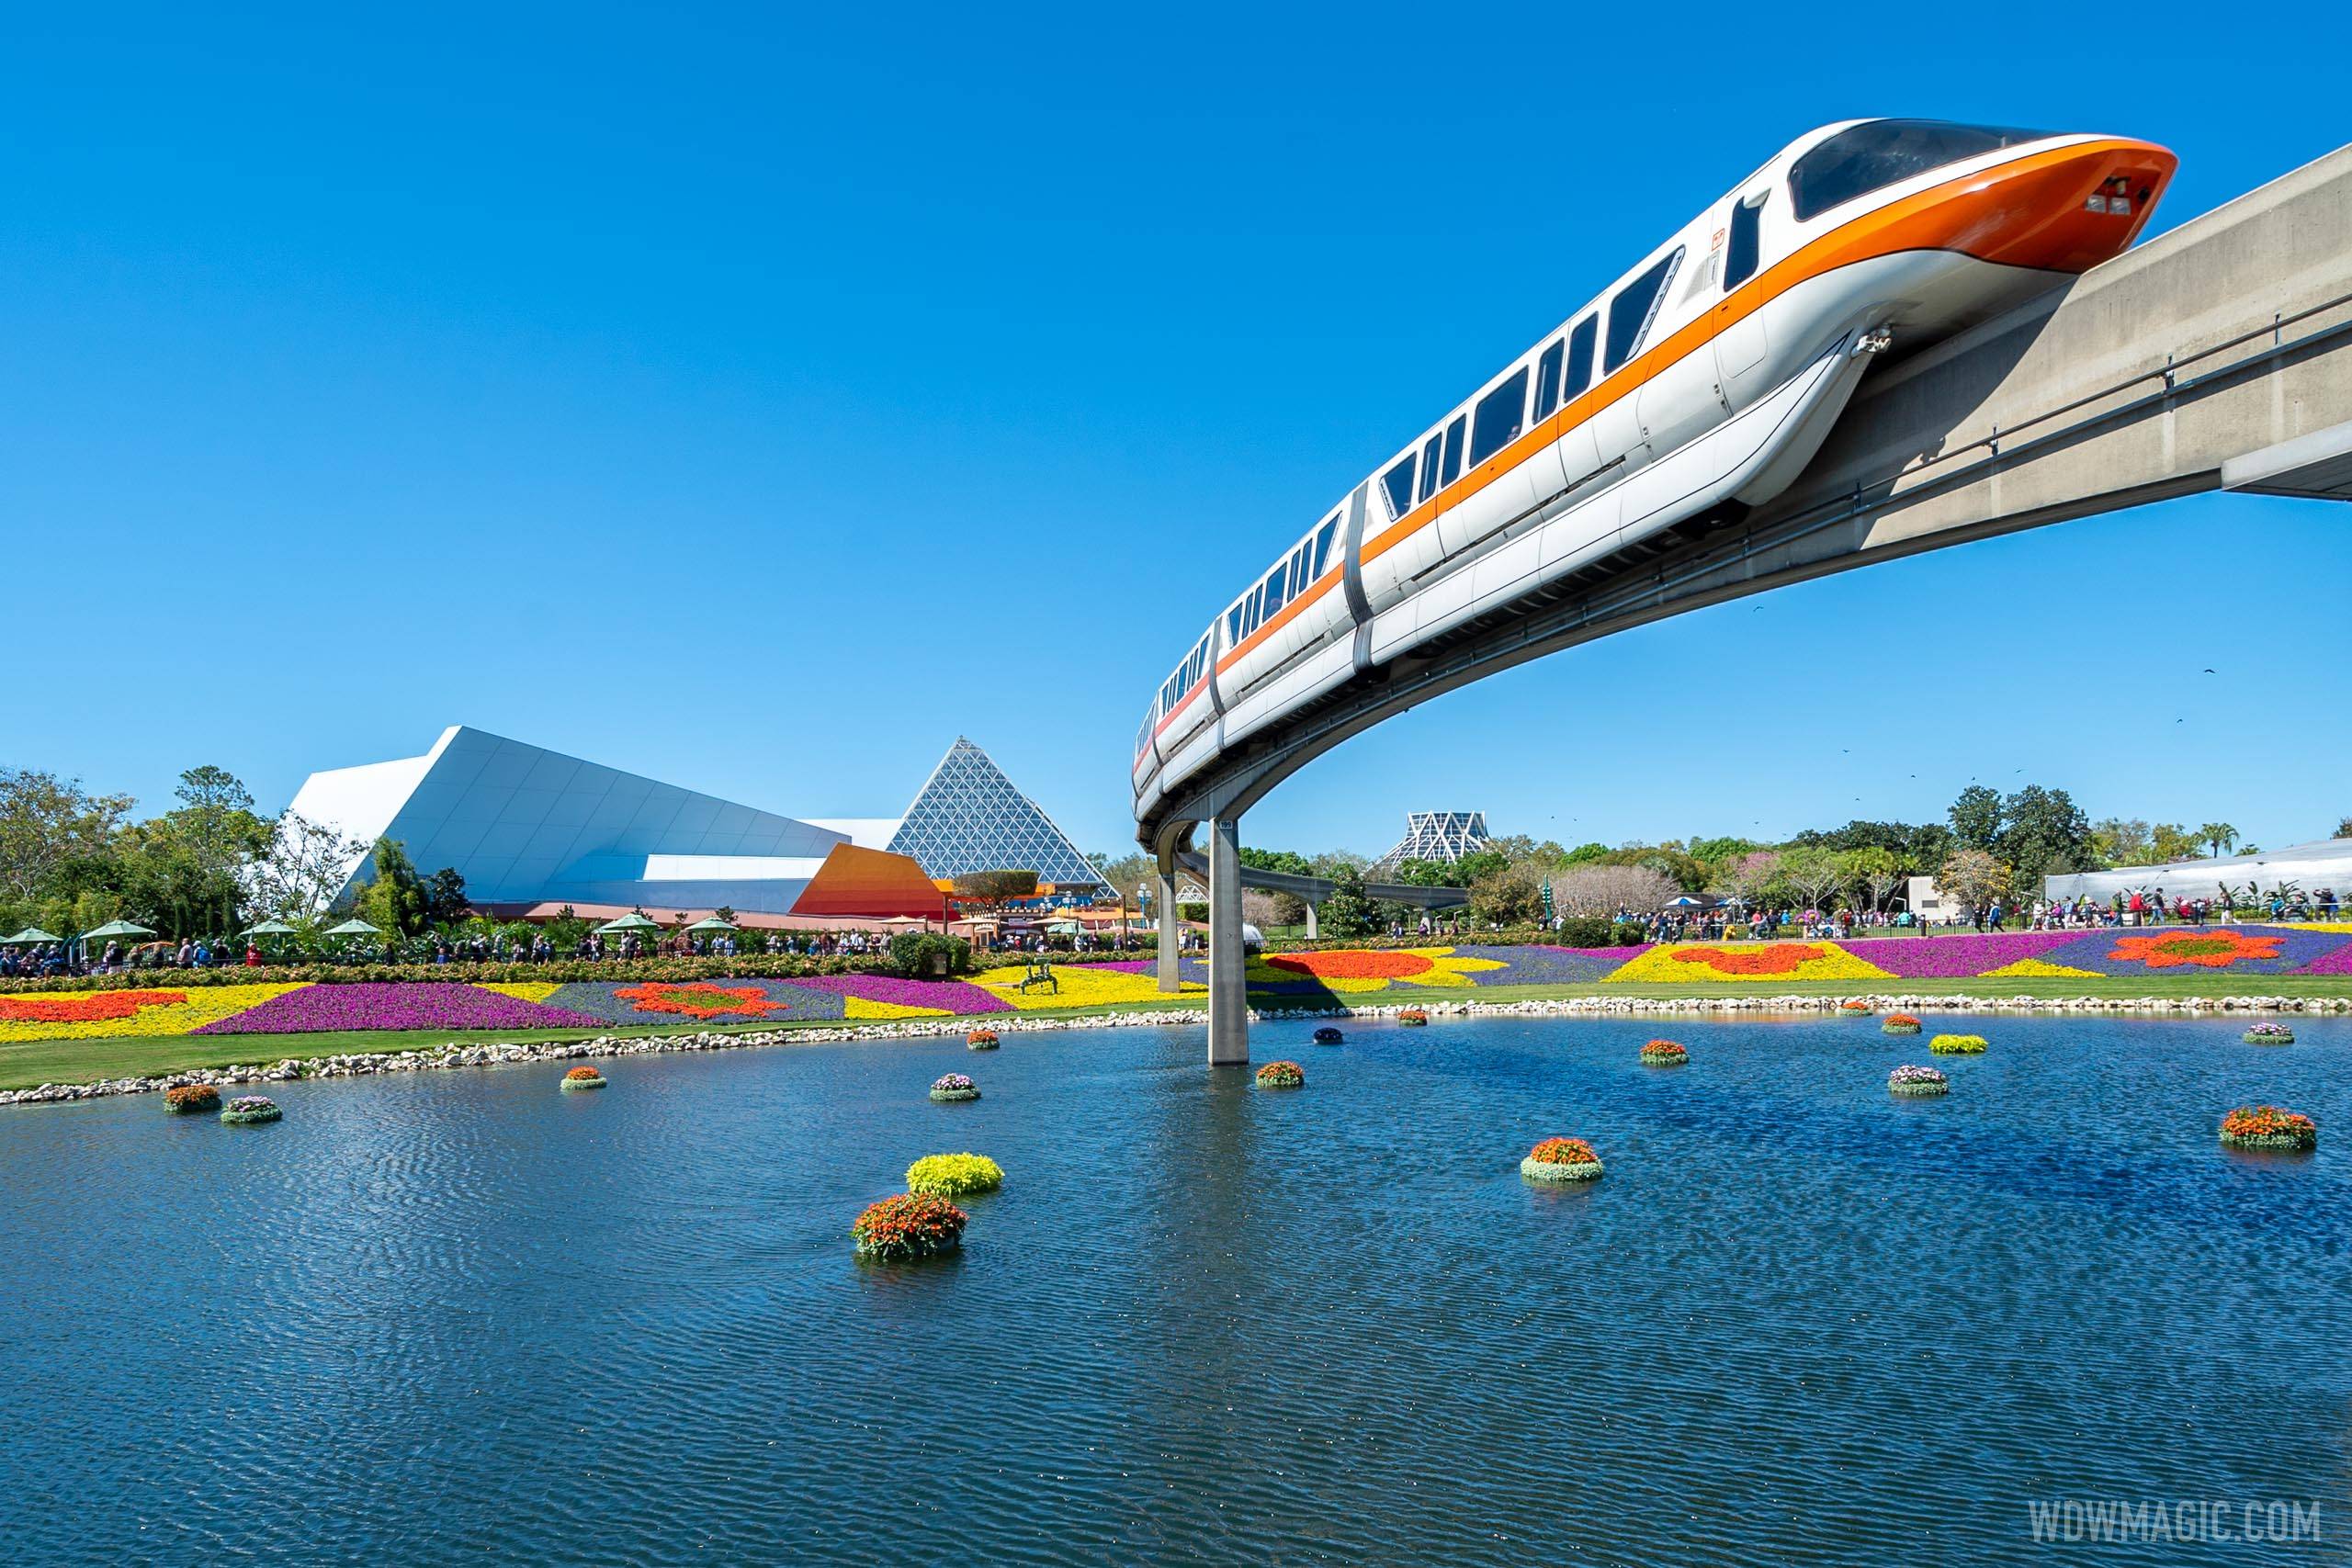 Malcolm Ross, Disney VP talks about monorail expansion